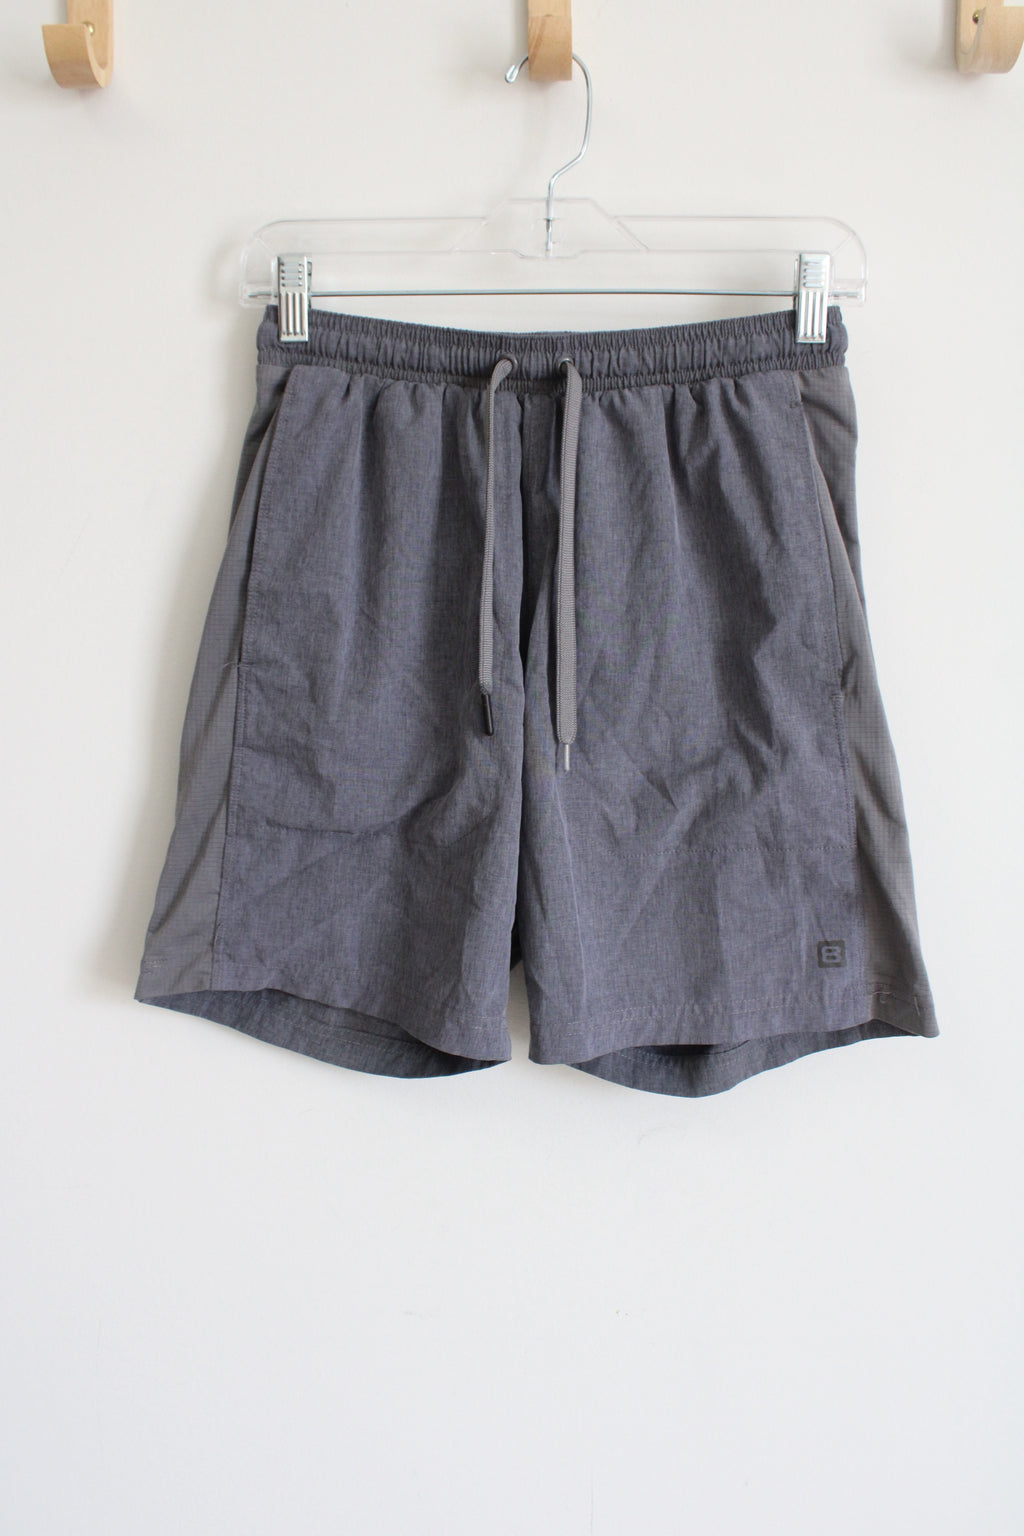 Layer8 Gray Athletic Shorts | S (28/30)